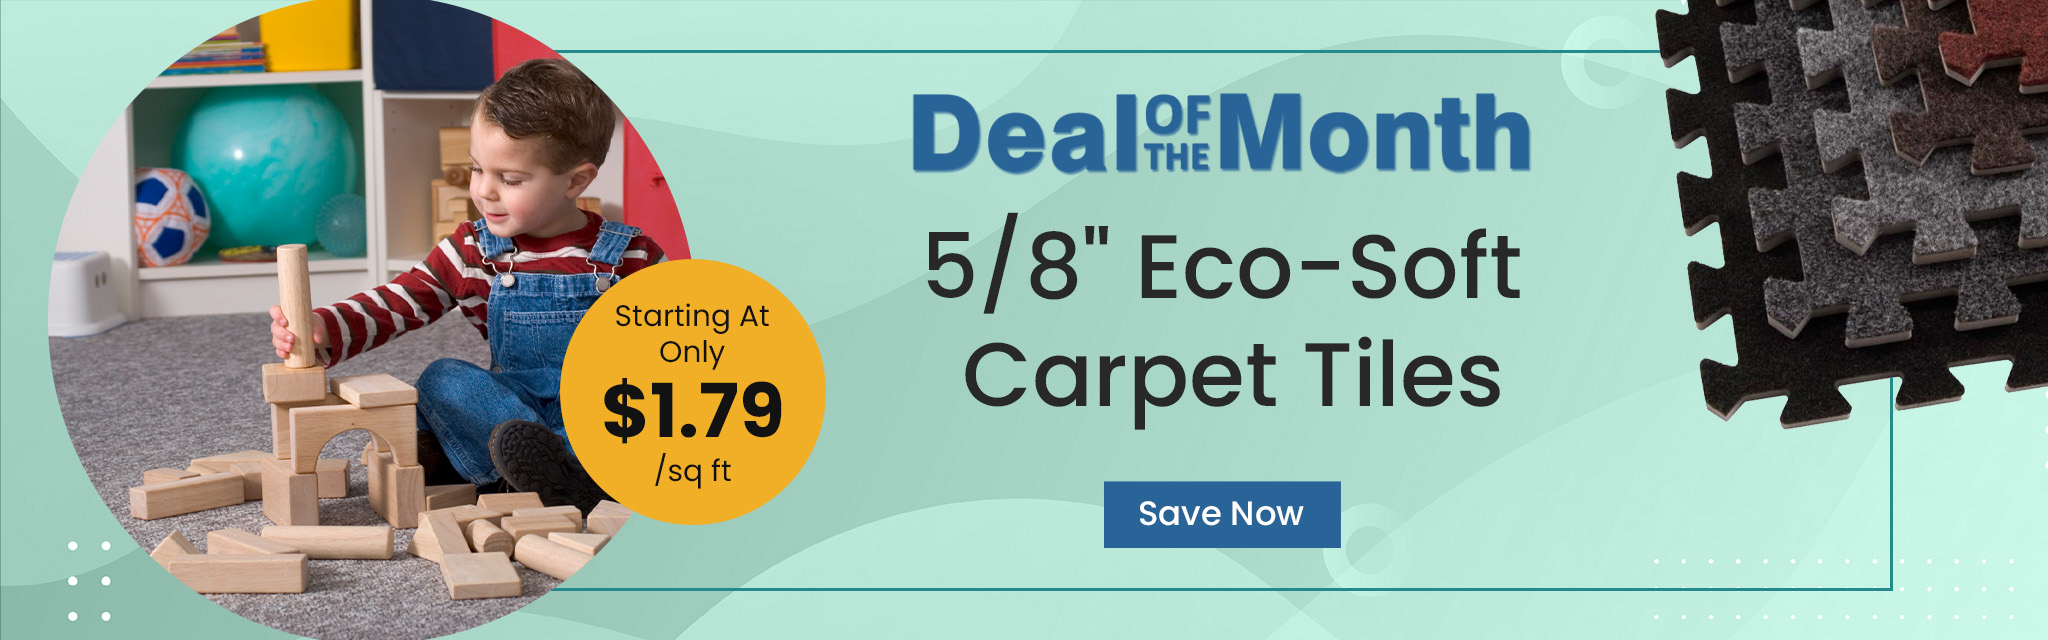 Deal Of The Month. 5/8" Eco-Soft Carpet Tiles. Starting At Only $1.79 per square feet. Save Now